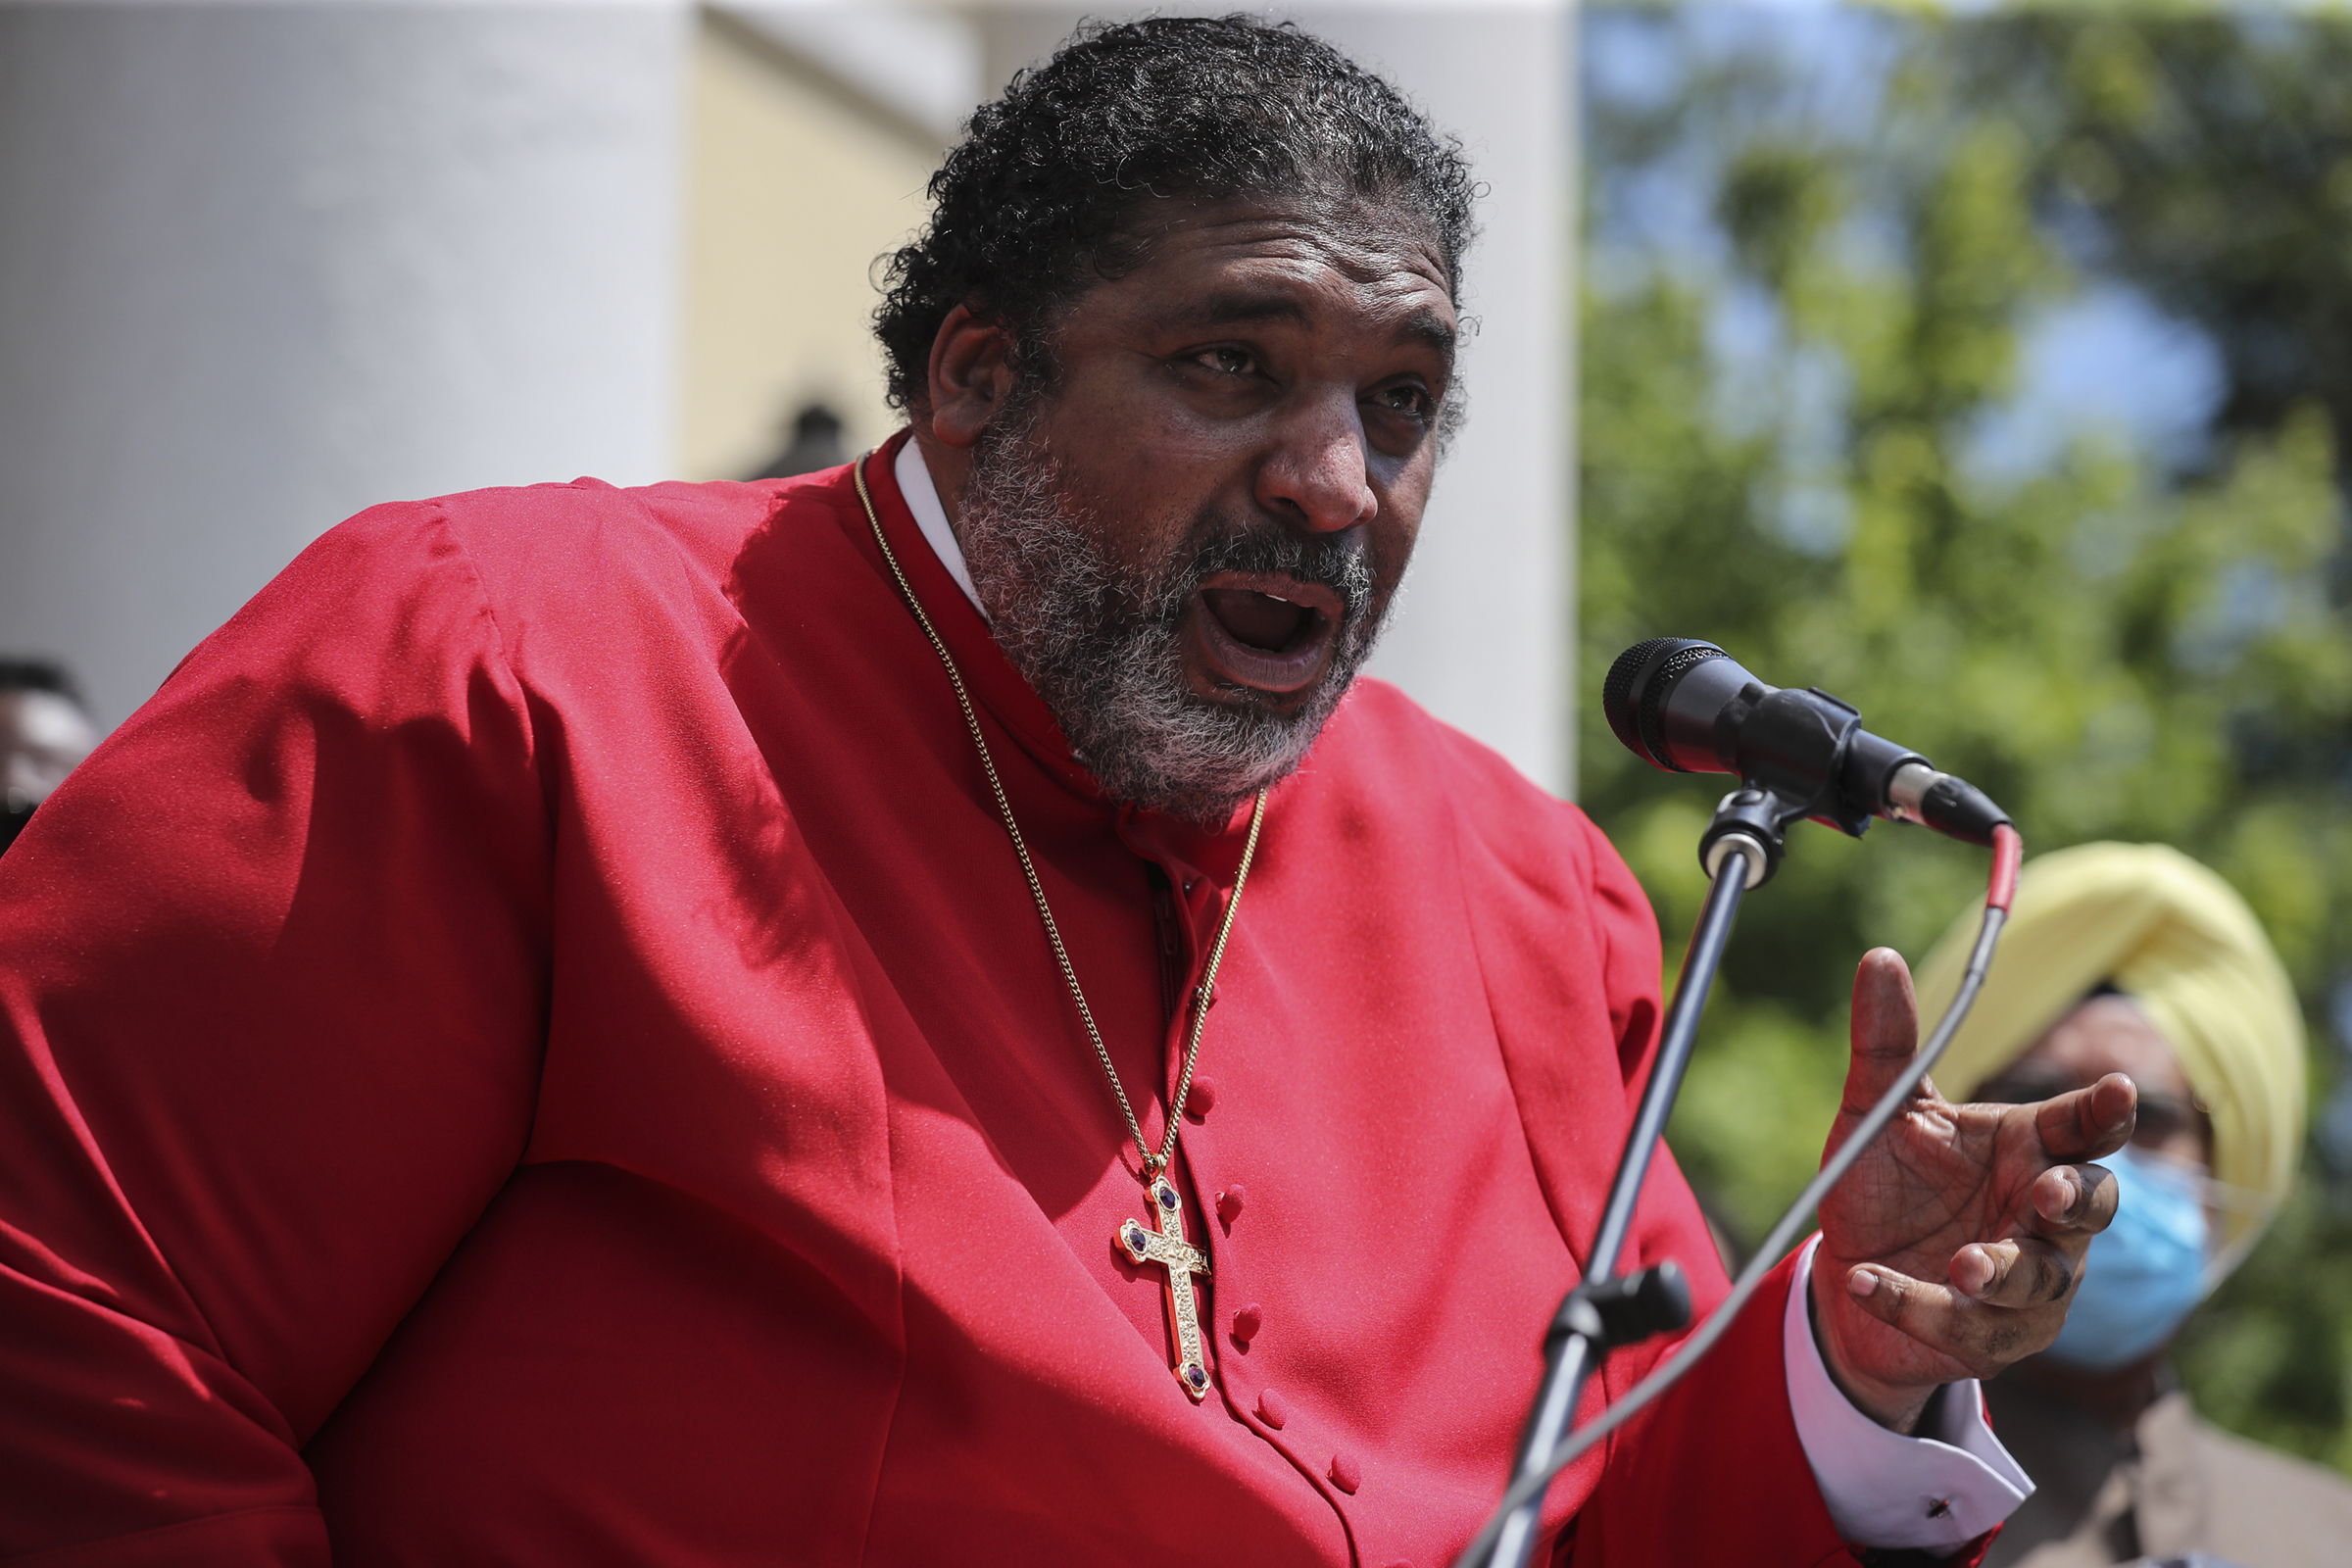 Rev. Dr. William J. Barber II alongside with faith leaders, speaks outside of the St. John's Episcopal Church Lafayette Square in Washington, D.C. on June 14, 2020. (Oliver Contreras—The Washington Post/Getty Images)